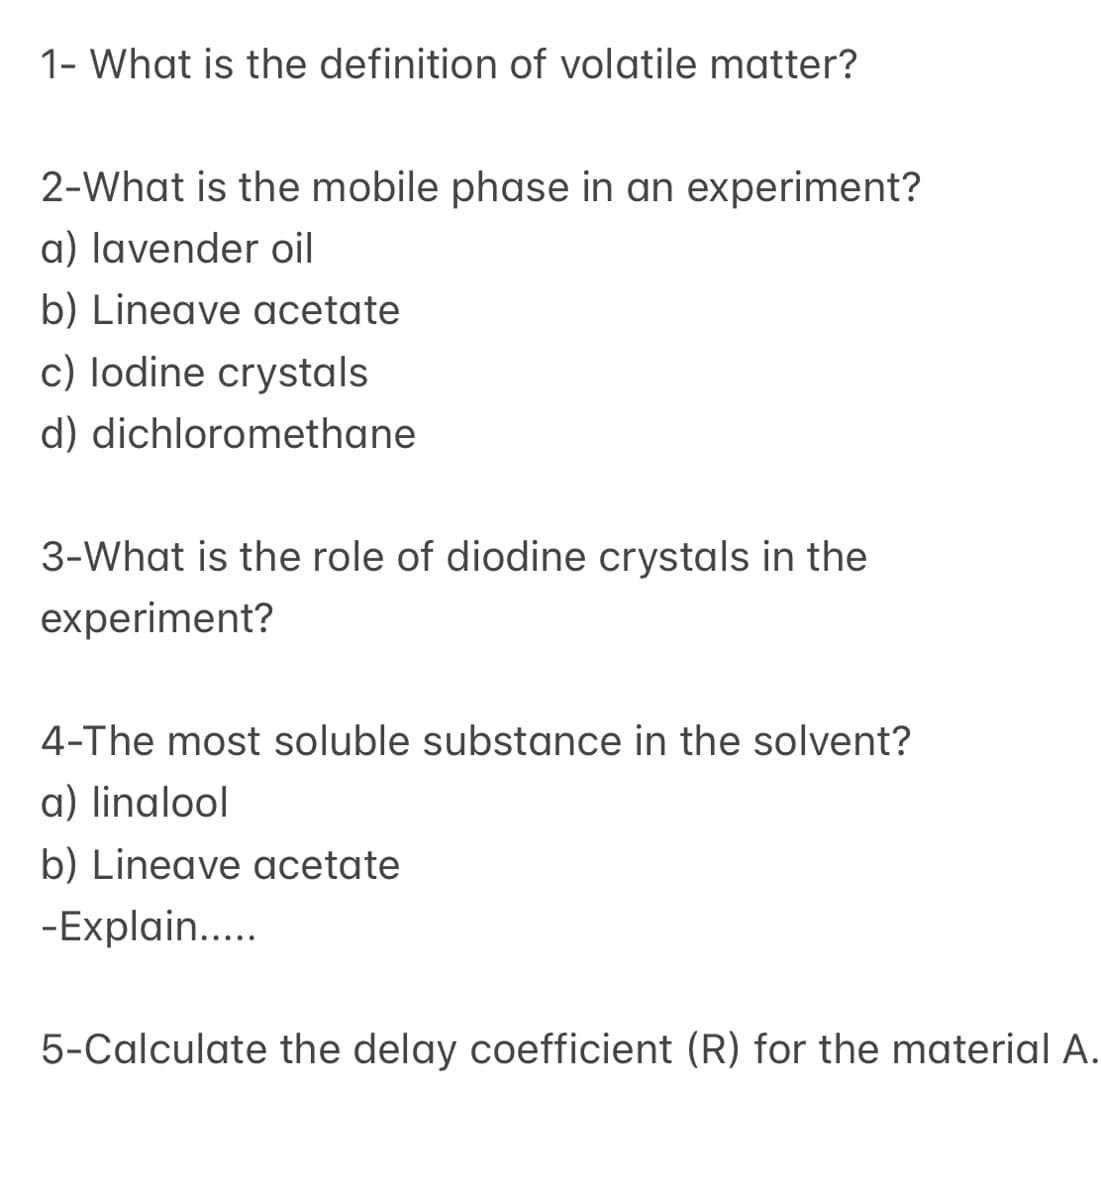 1- What is the definition of volatile matter?
2-What is the mobile phase in an experiment?
a) lavender oil
b) Lineave acetate
c) lodine crystals
d) dichloromethane
3-What is the role of diodine crystals in the
experiment?
4-The most soluble substance in the solvent?
a) linalool
b) Lineave acetate
-Explain..
5-Calculate the delay coefficient (R) for the material A.
